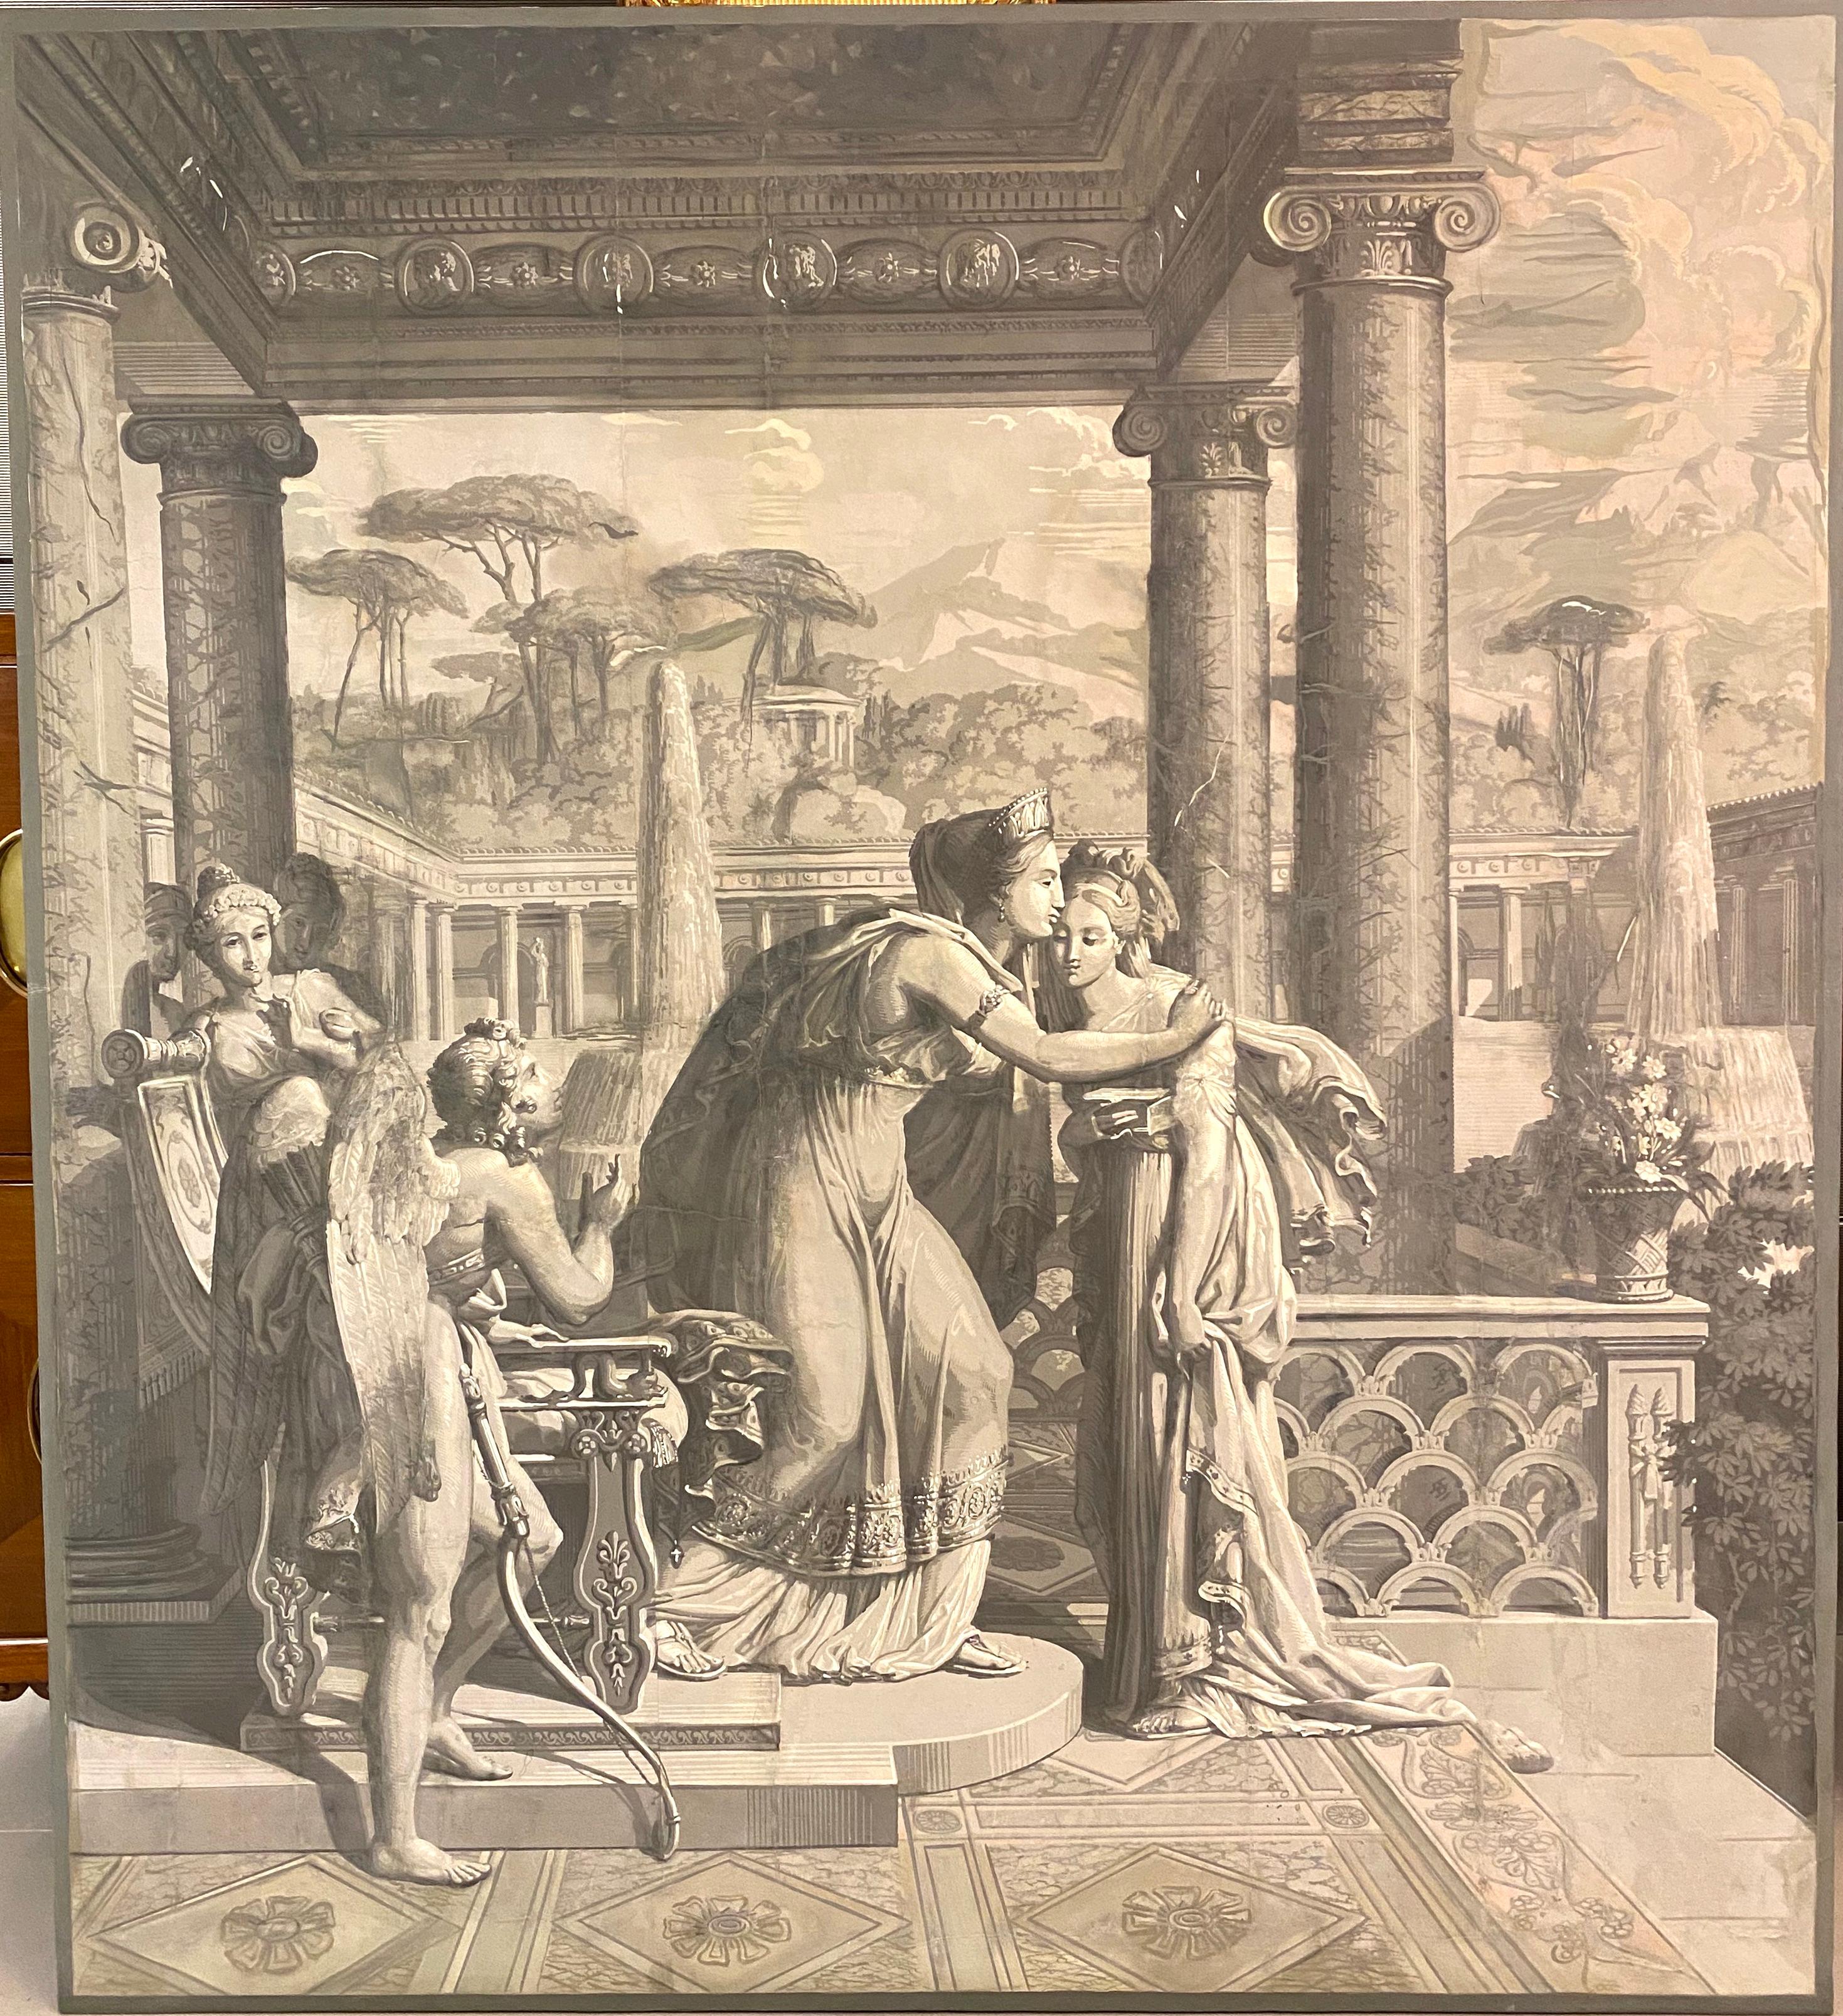 Papiers peints 'En Grisaille' from the psyche´ series manufactured by Dufour, Paris, after designs by Merry-Joseph Blondel and Louis Lafitte.
Depicting `the Reconciliation of Venus and Psyché' .
186cm high, 165.5cm wide; 6ft. 1¾in., 5ft.